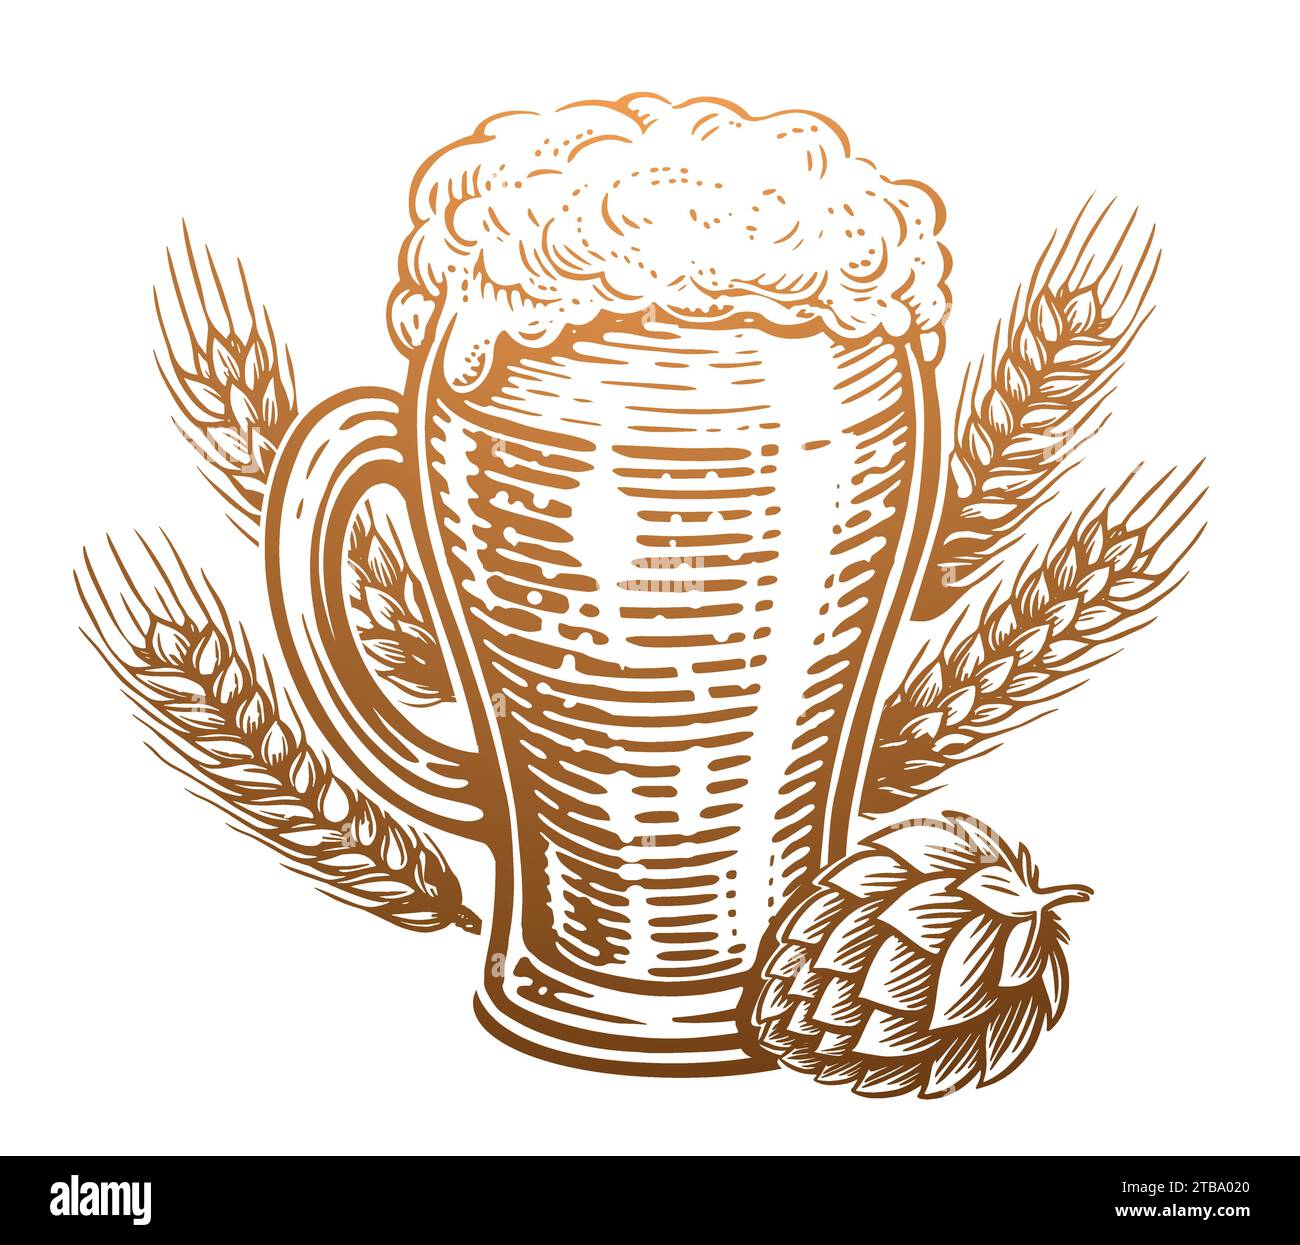 Beer glass with overflowing foam, hops and wheat. Pub, sketch vintage vector illustration Stock Vector